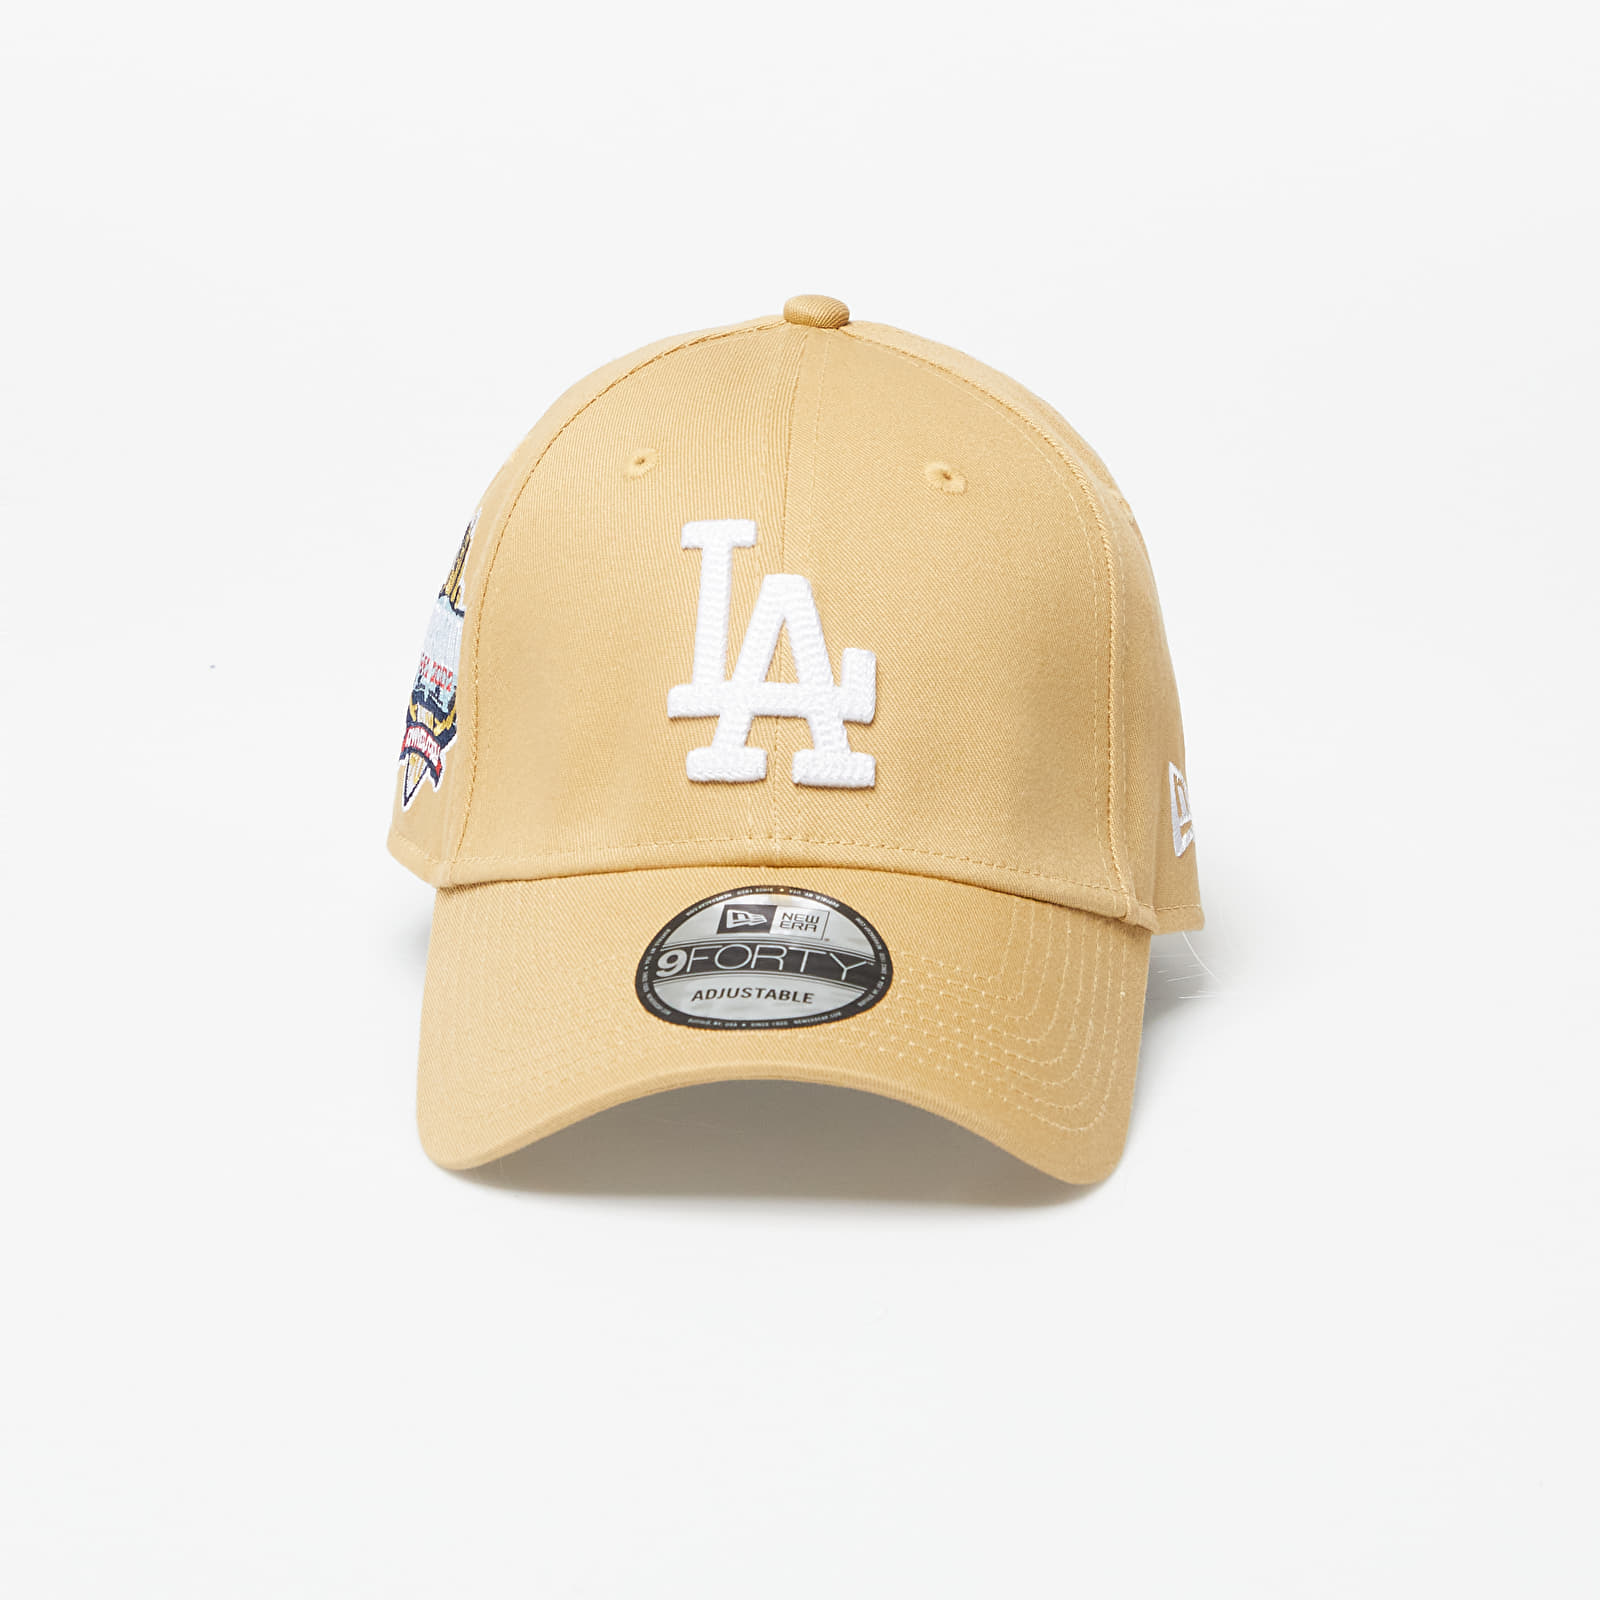 New Era - los angeles dodgers new traditions 9forty adjustable cap bronze/ white